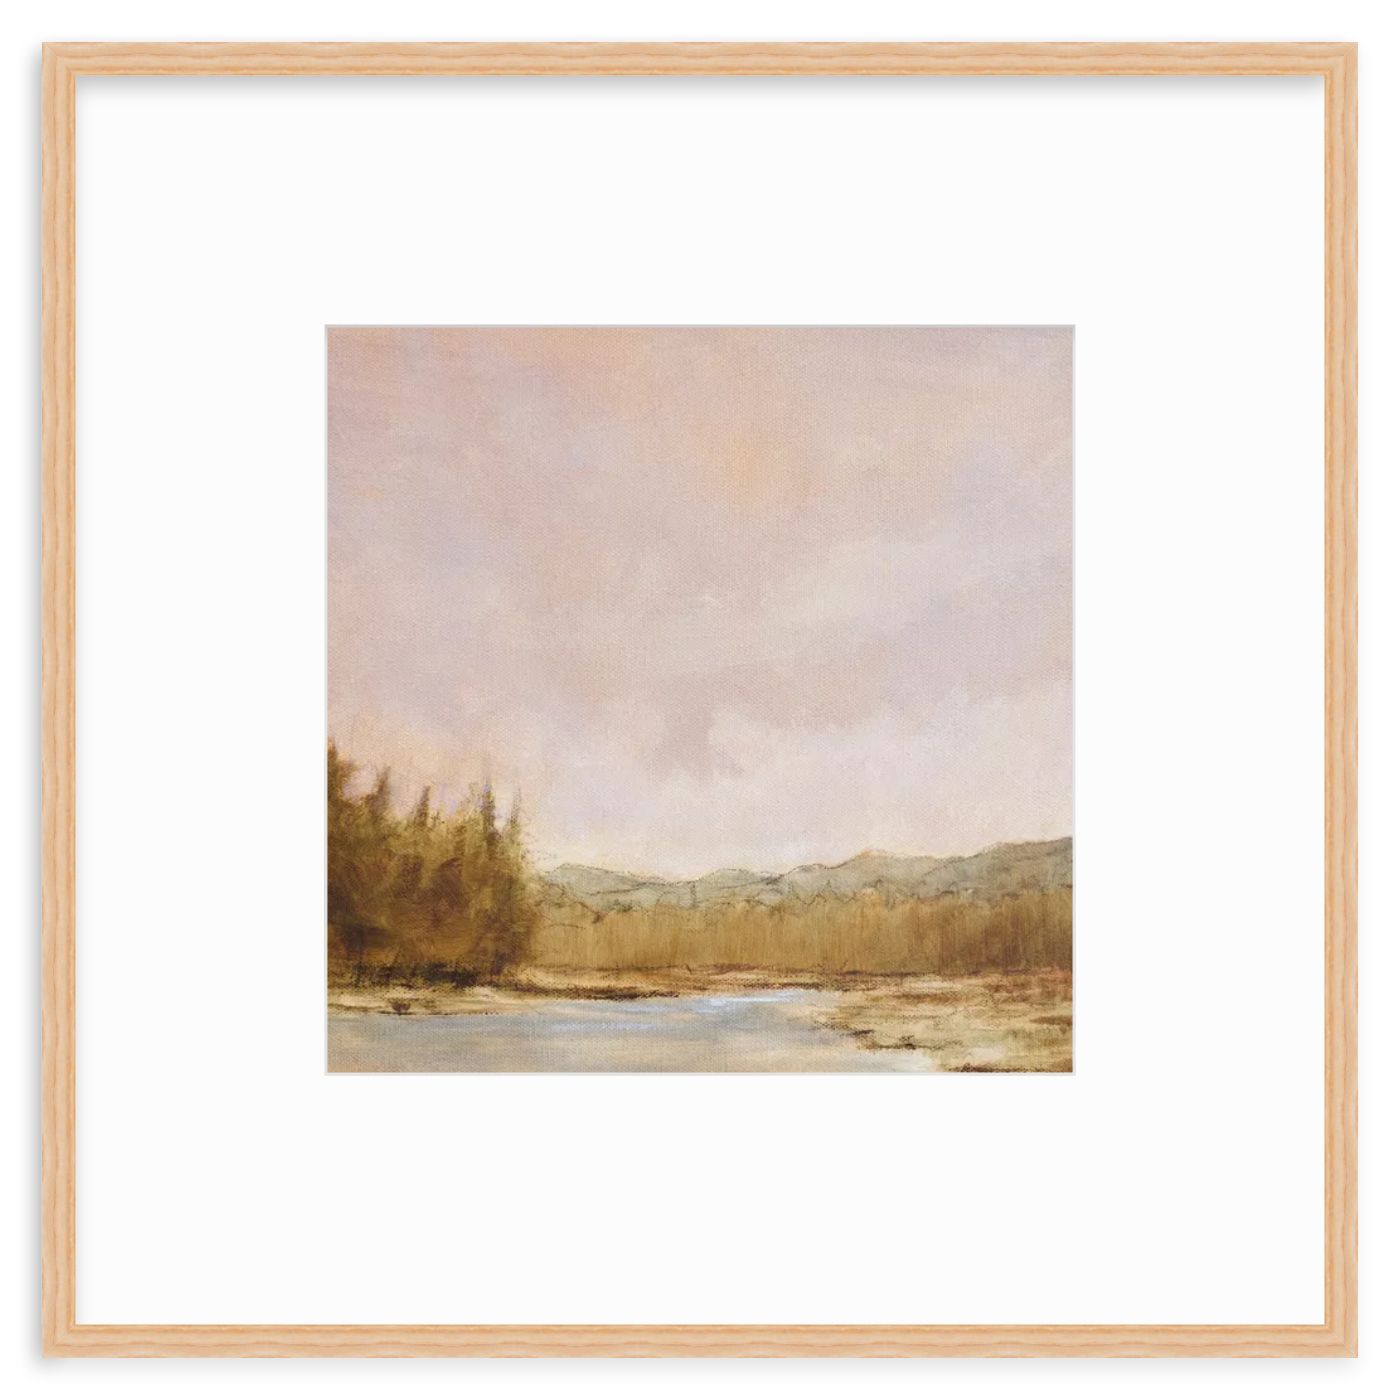 The Peace Within Us, 03, 23x23" framed print